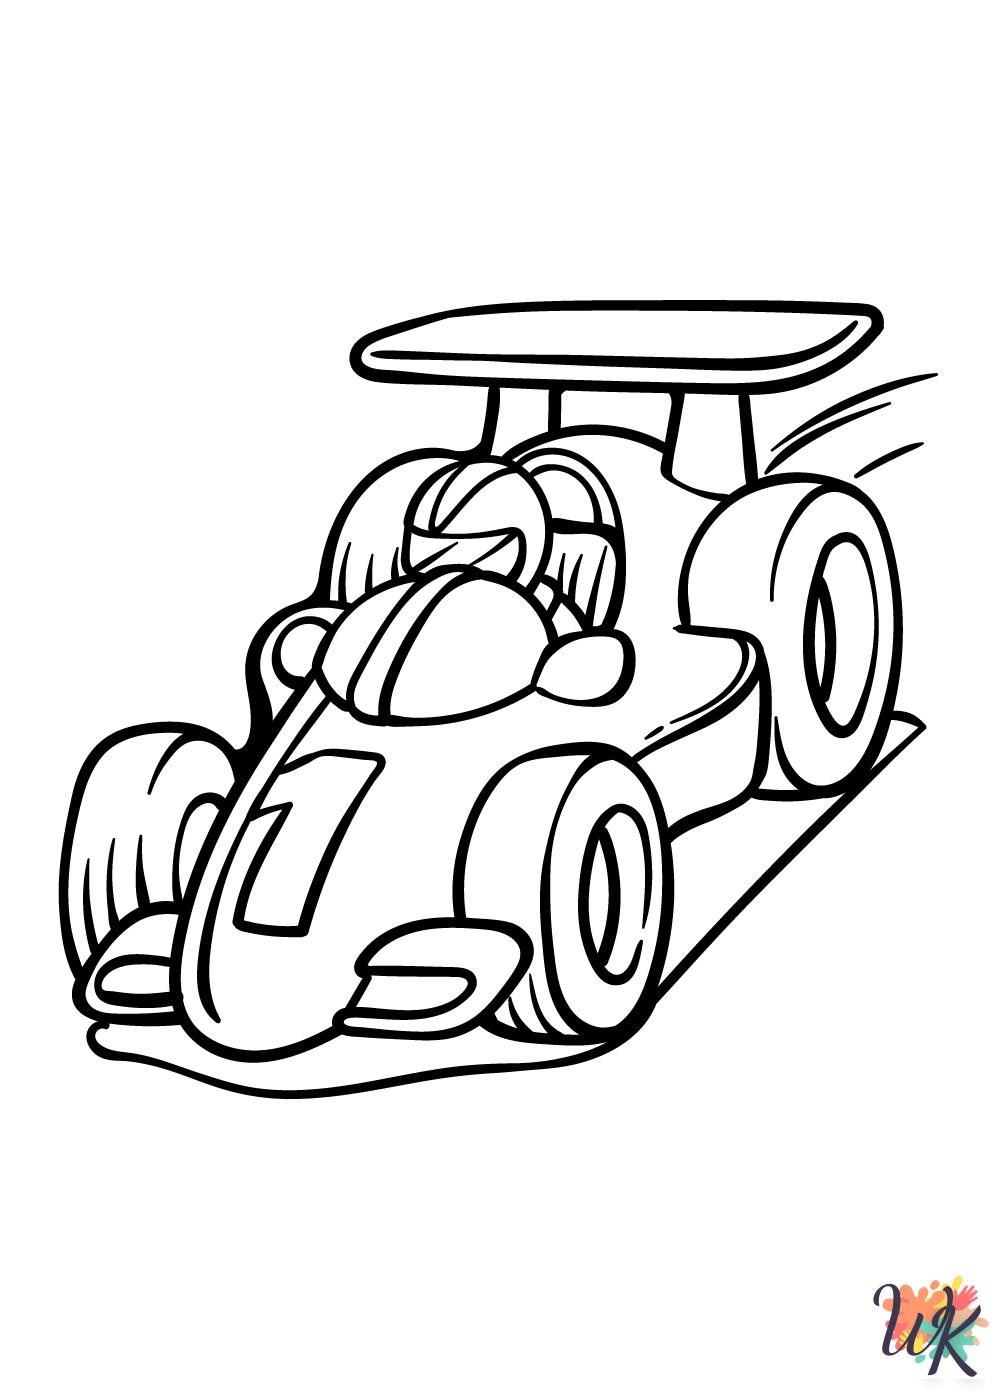 old-fashioned Race Car coloring pages